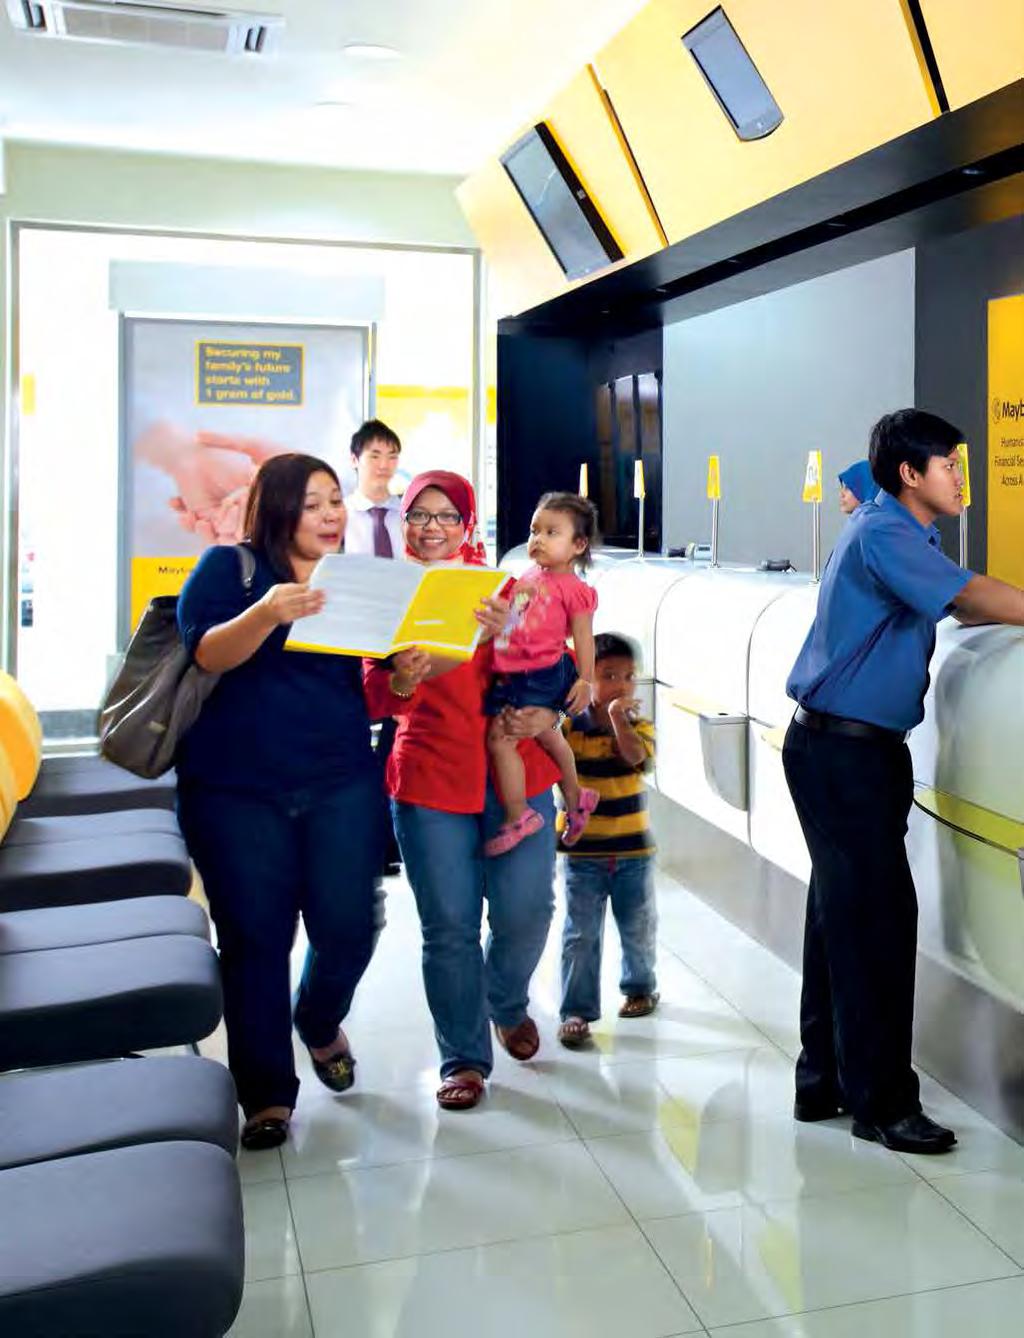 26 Maybank Annual Report 2013 As one of the